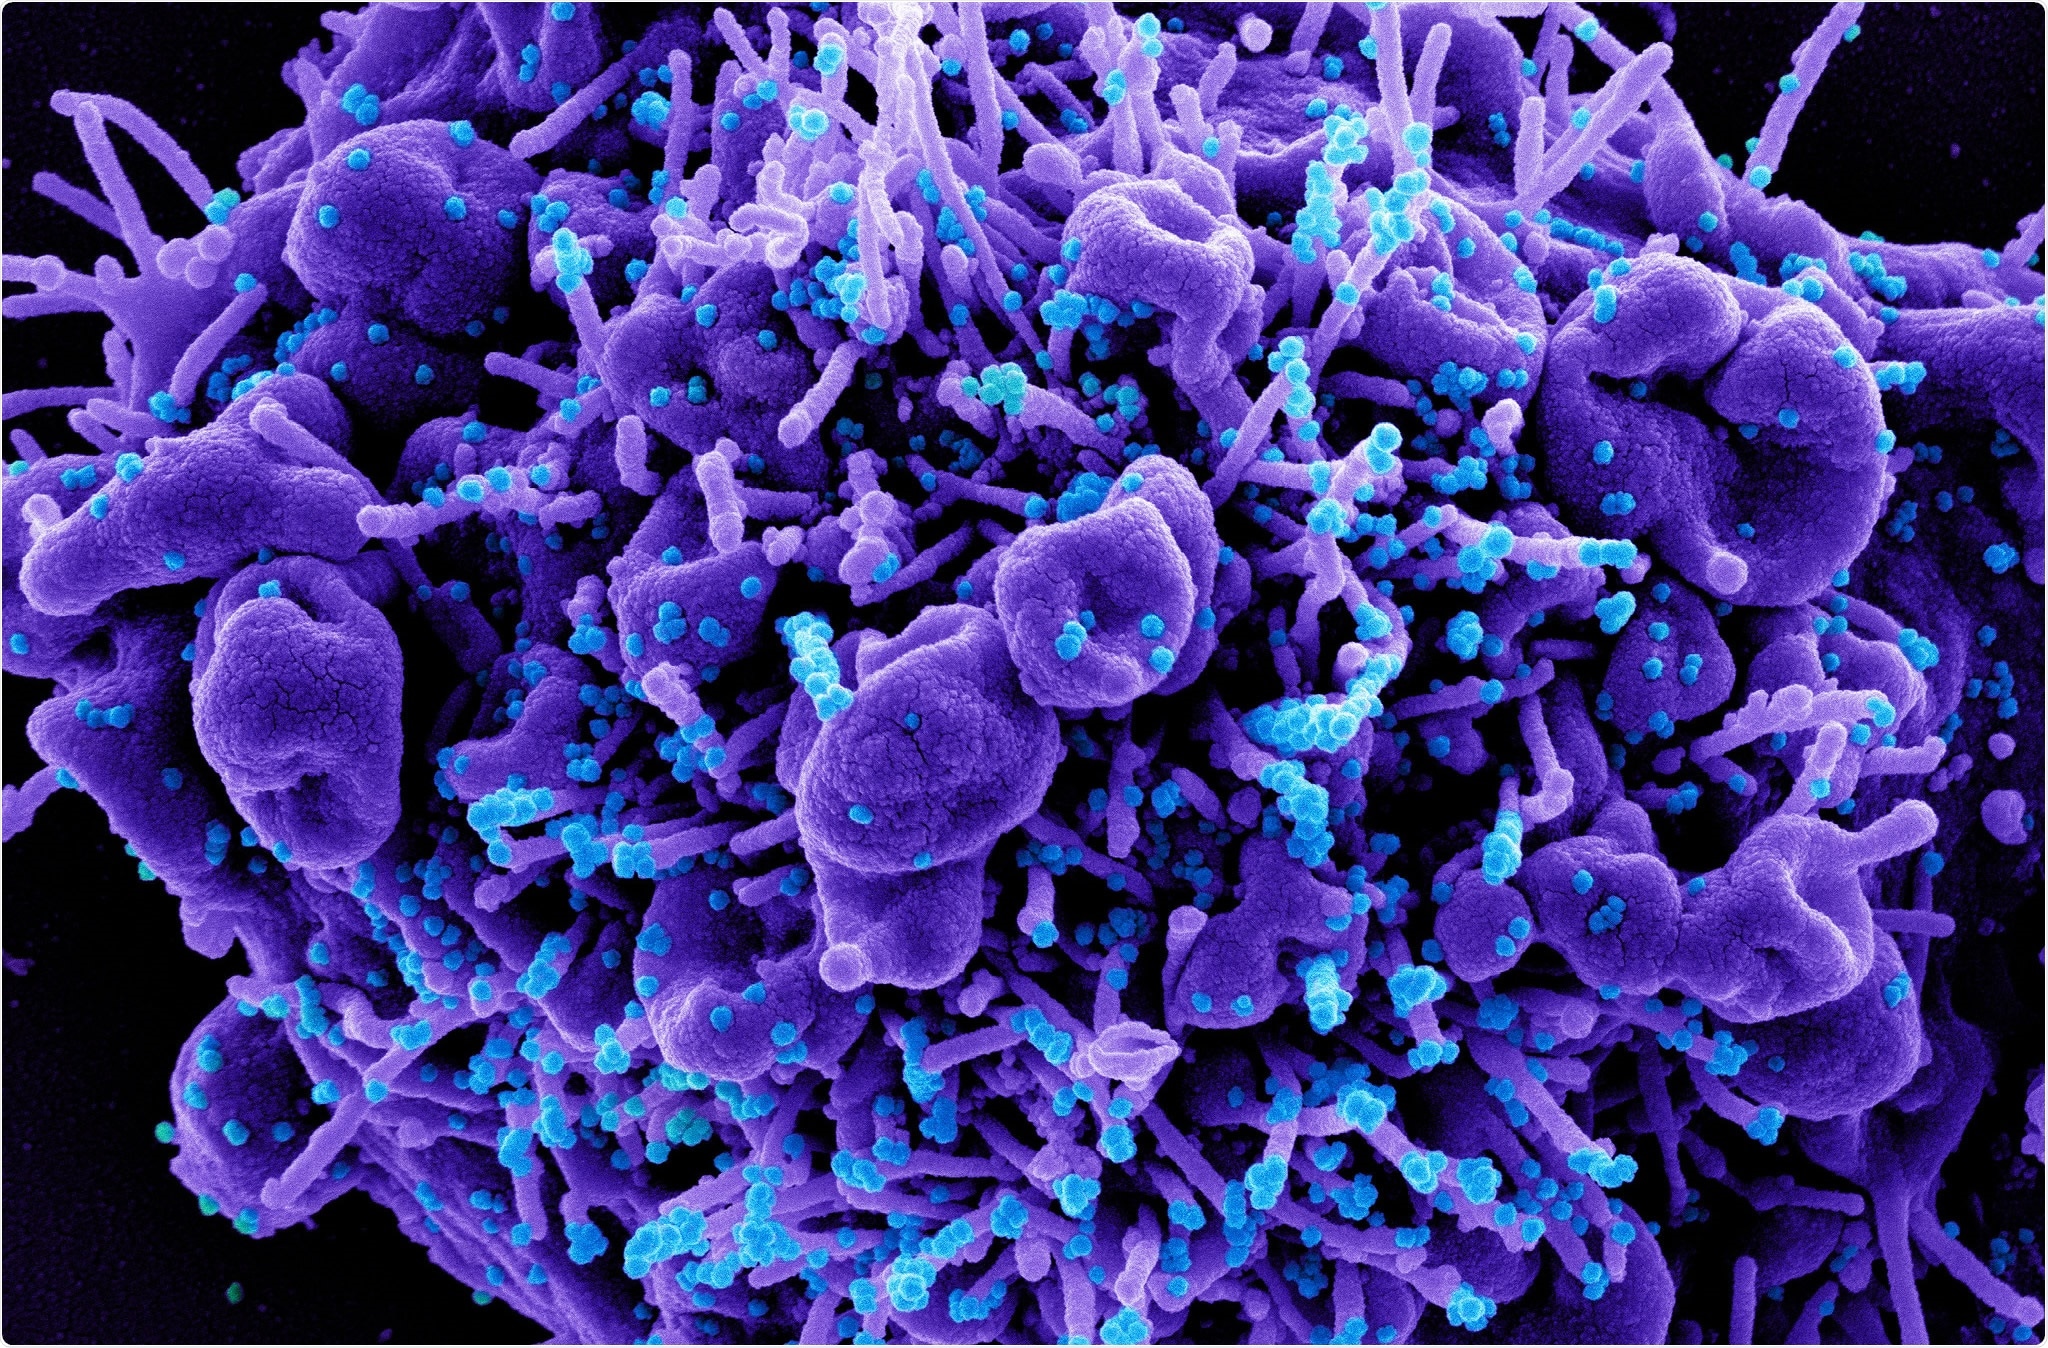 Study: De novo emergence of a remdesivir resistance mutation during treatment of persistent SARS-CoV-2 infection in an immunocompromised patient: A case report. Image Credit: NIAID